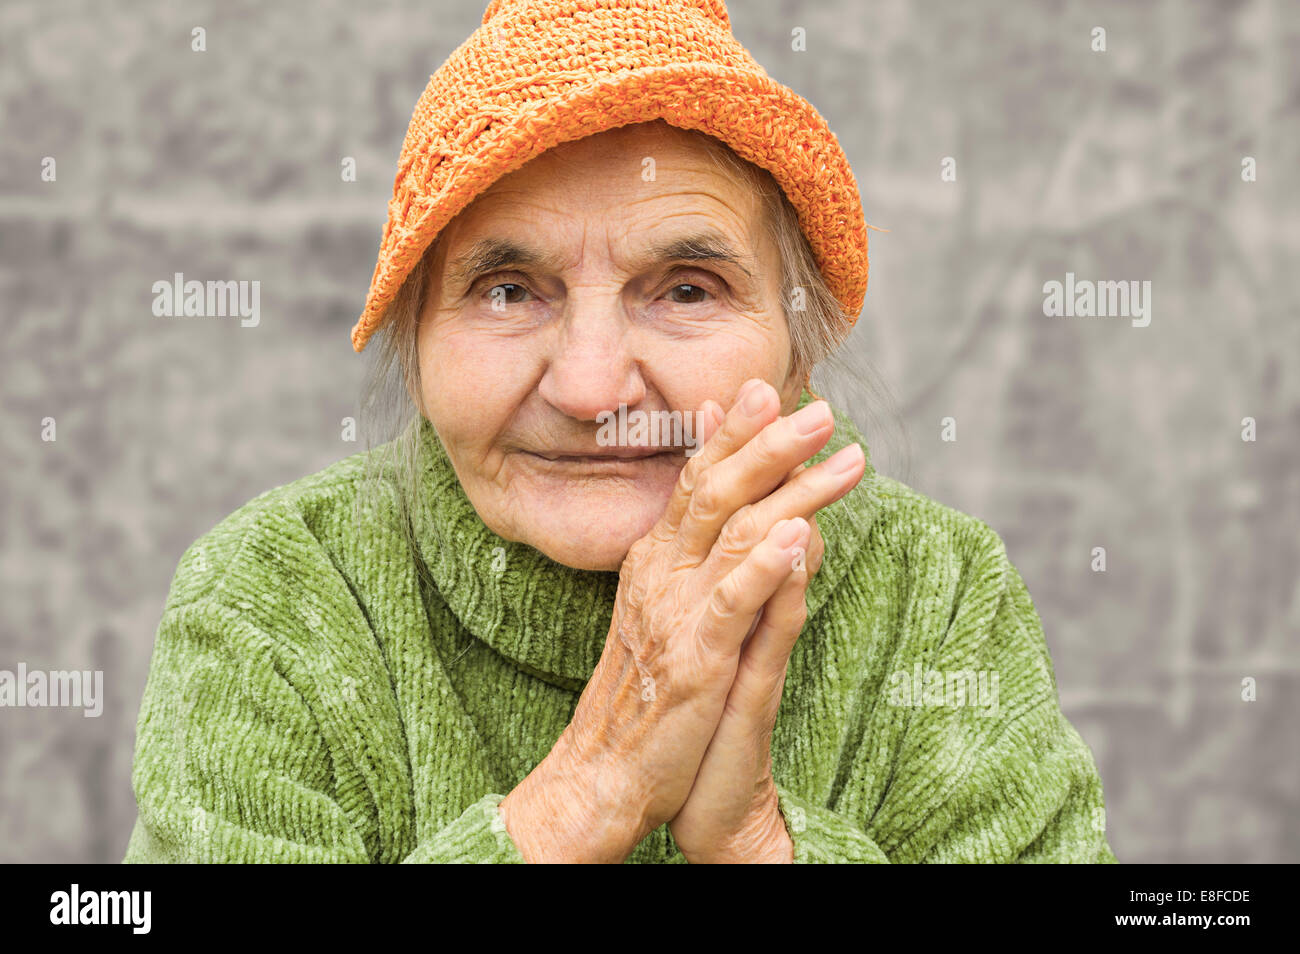 Portrait of a happy senior woman smiling at the camera Stock Photo